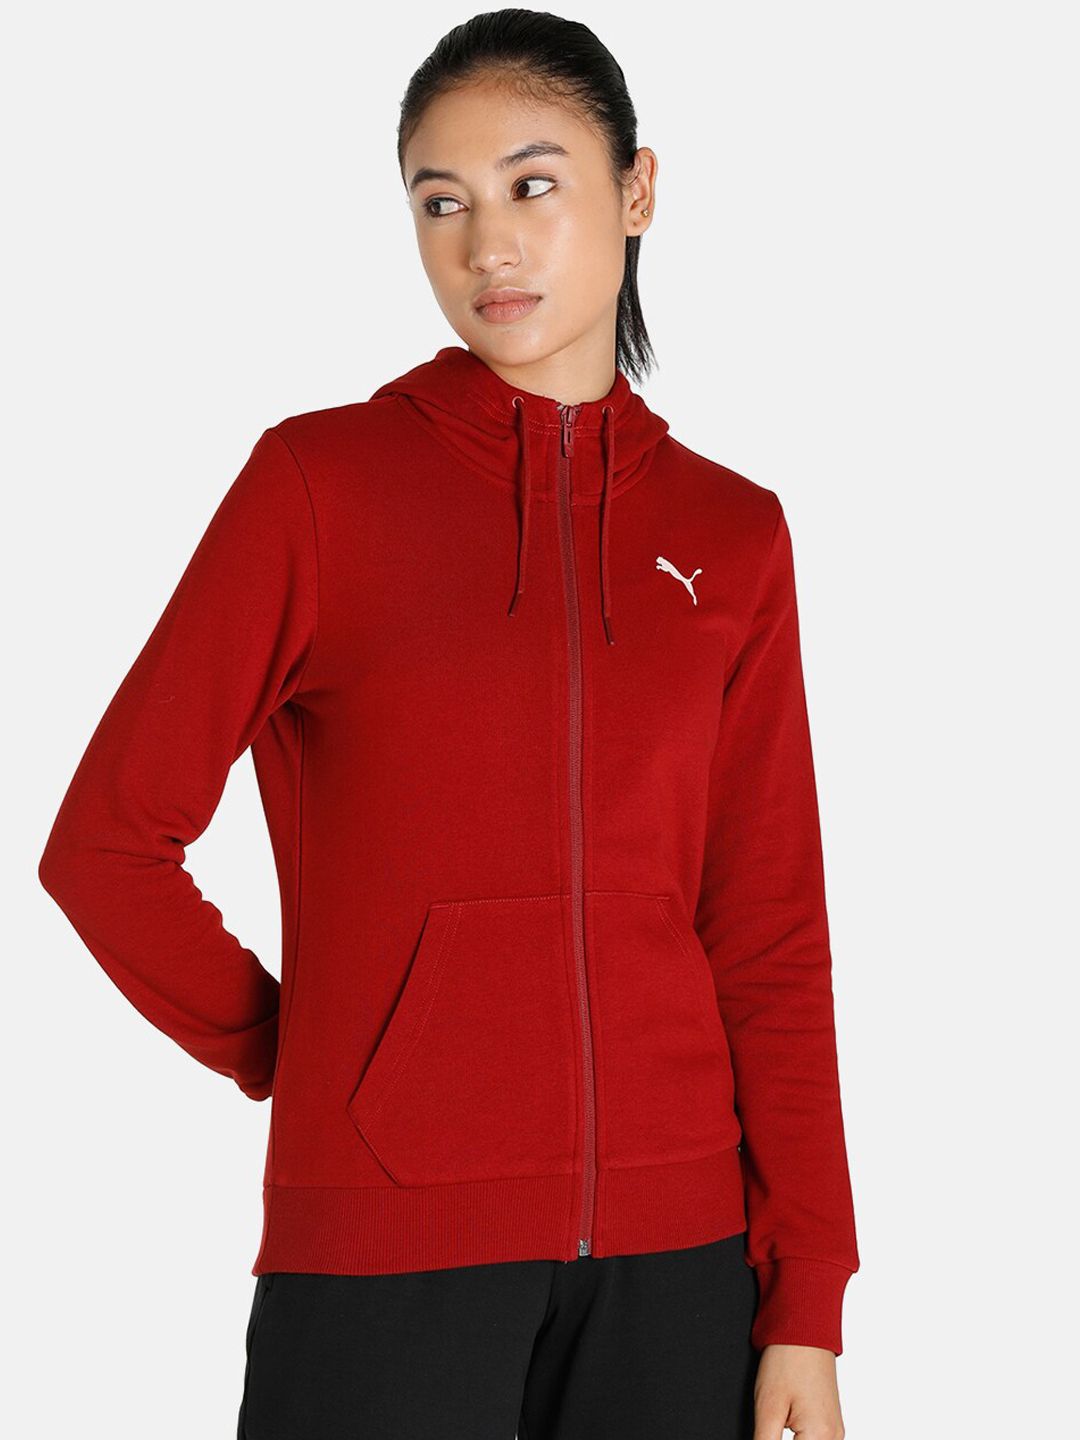 Puma Women Red Brand Logo Printed Hooded Jacket Price in India